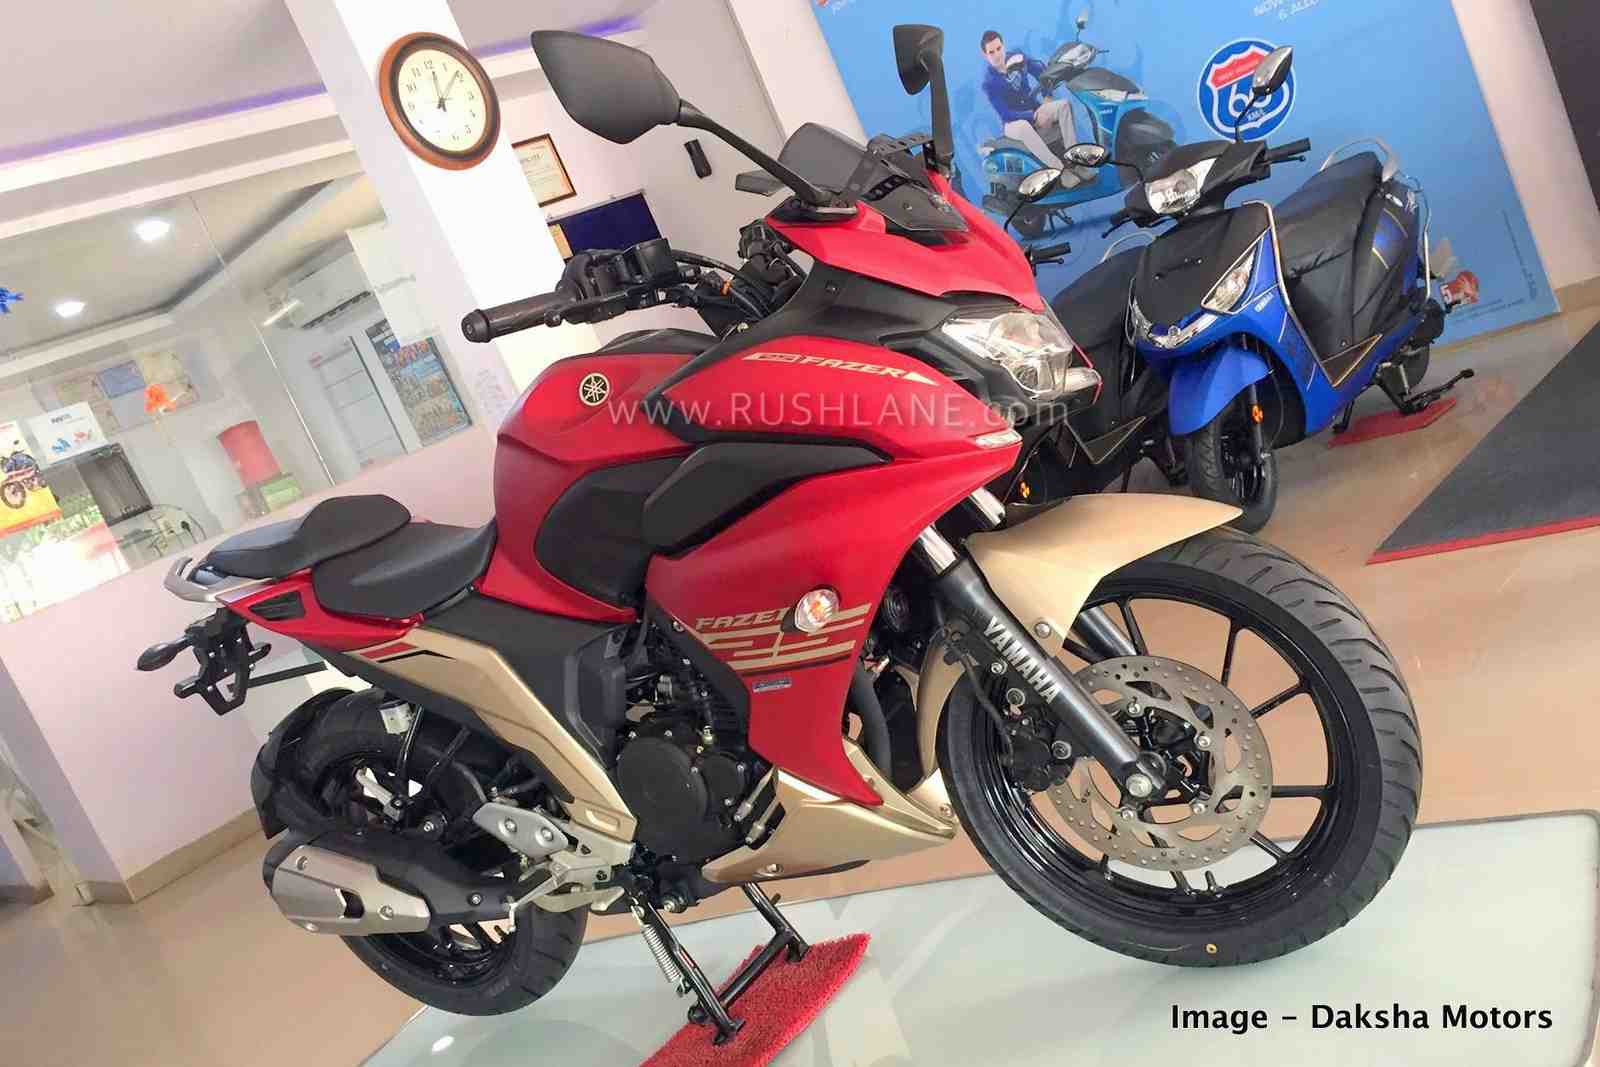 Yamaha Fazer 25 Fz 25 Recalled In India Over 13 000 Bikes Affected